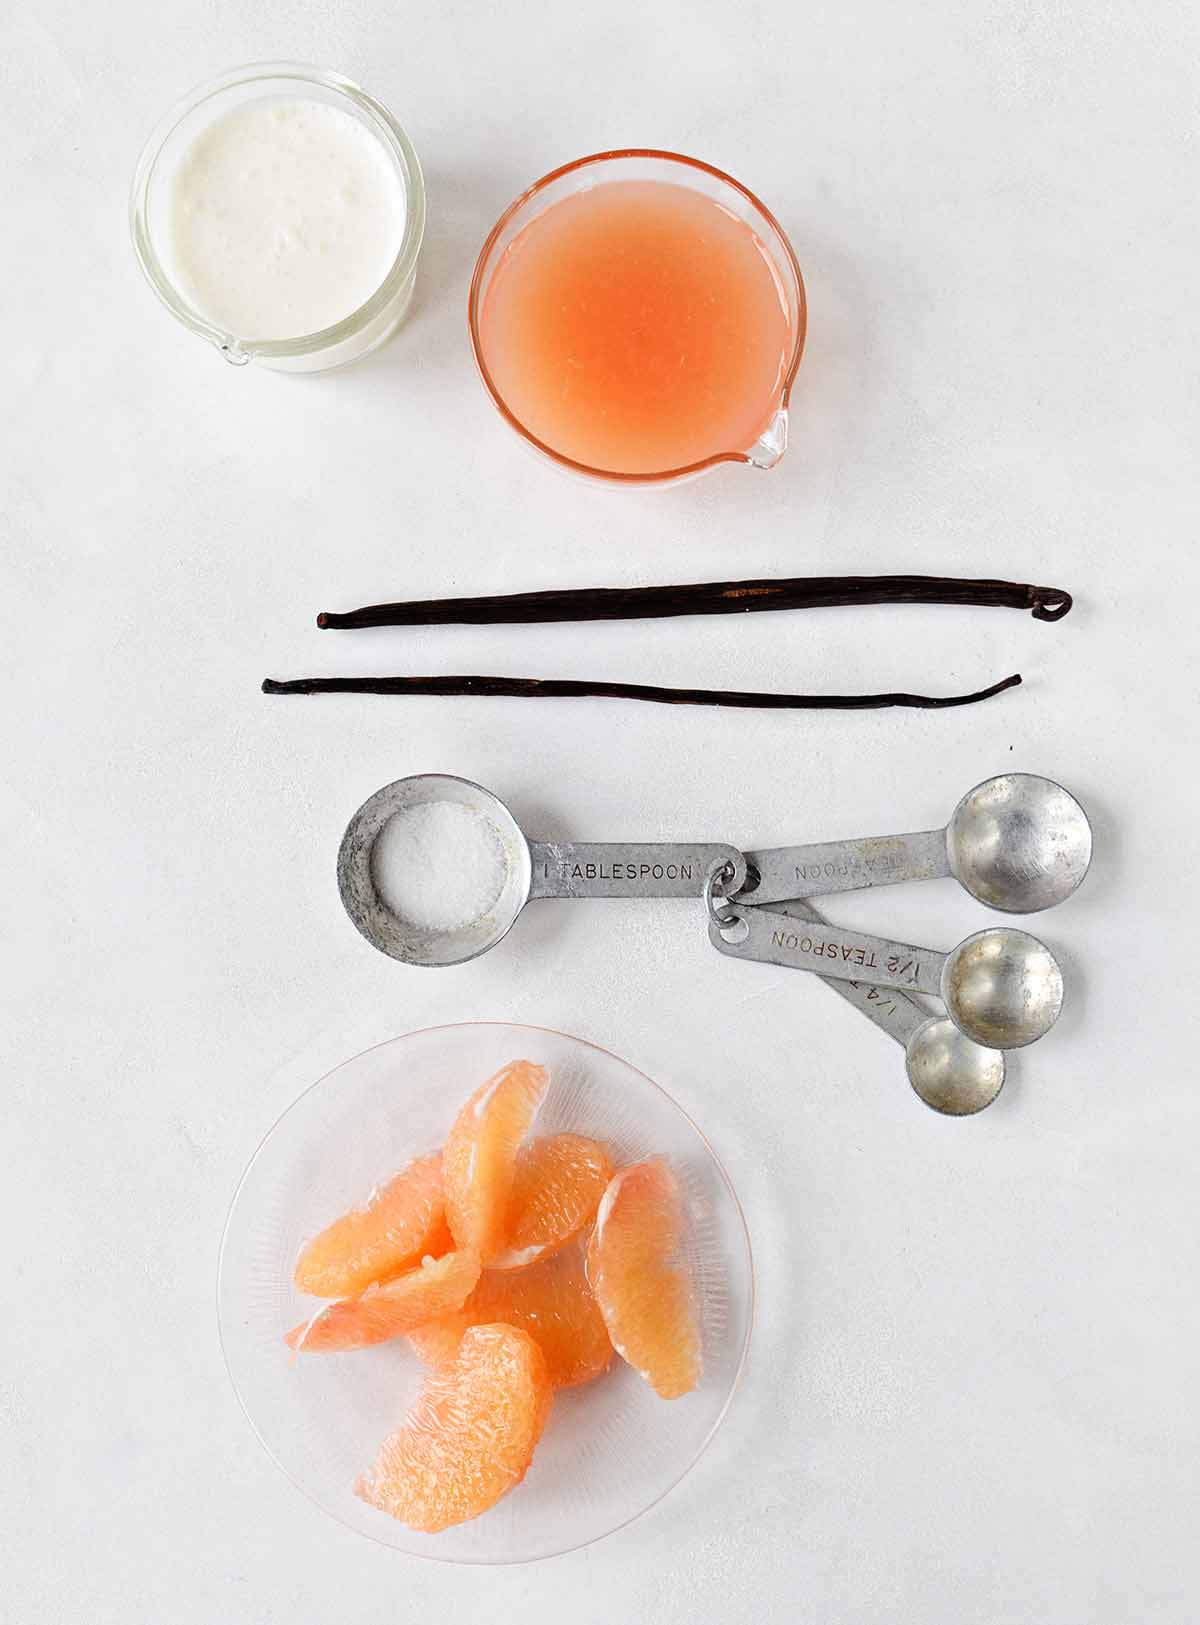 The components of grapefruit and vanilla bean panna cotta -- cream, grapefruit juice and segments, sugar, and two vanilla beans -- arranged on a white surface.